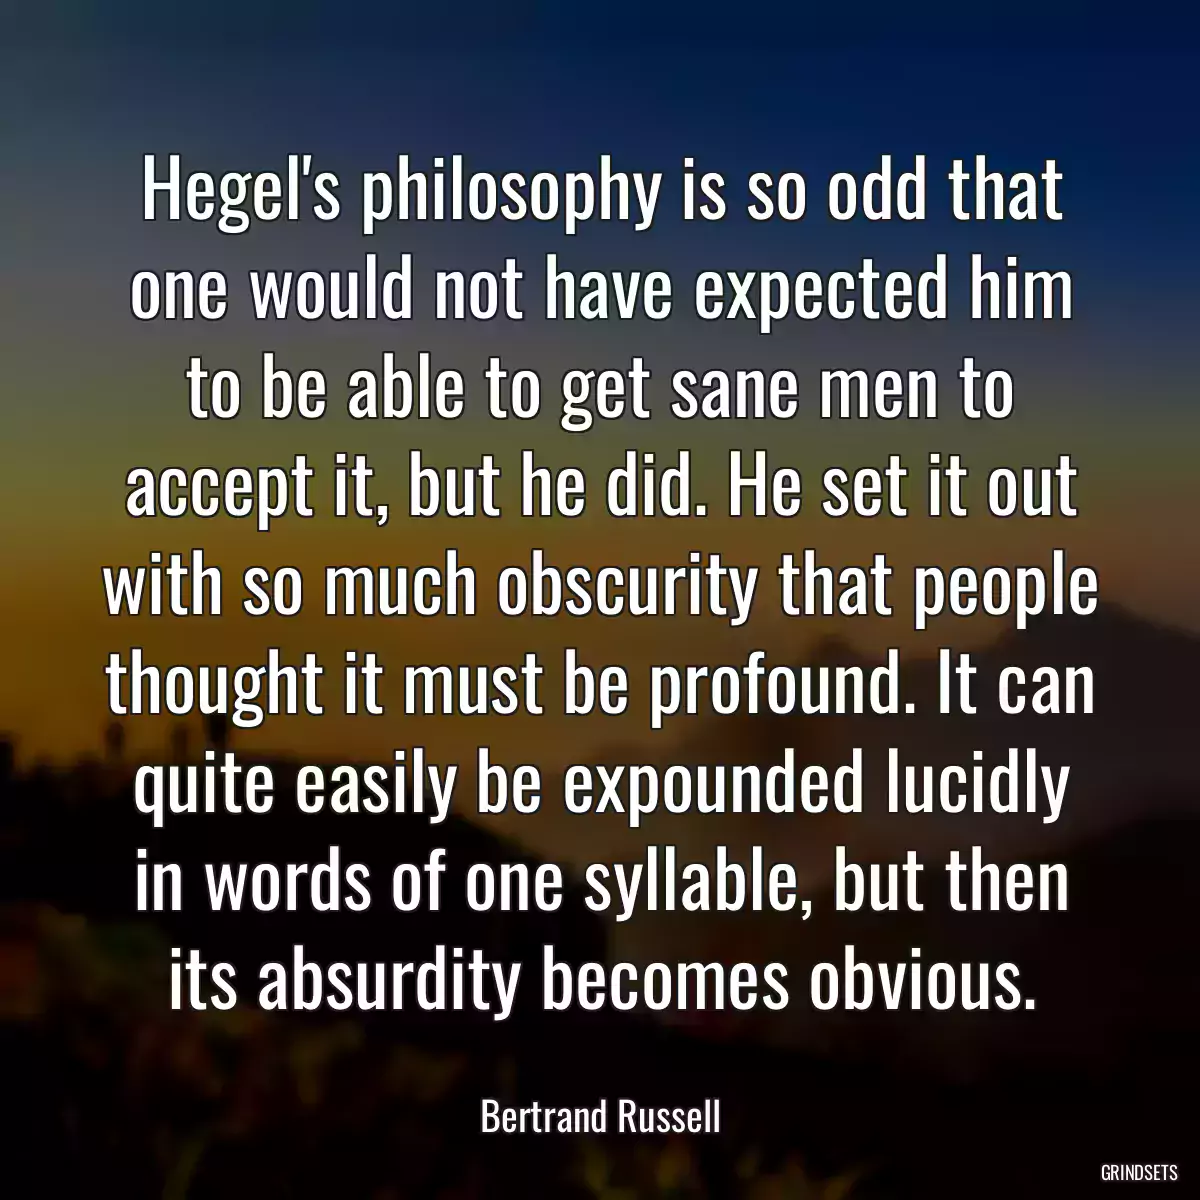 Hegel\'s philosophy is so odd that one would not have expected him to be able to get sane men to accept it, but he did. He set it out with so much obscurity that people thought it must be profound. It can quite easily be expounded lucidly in words of one syllable, but then its absurdity becomes obvious.